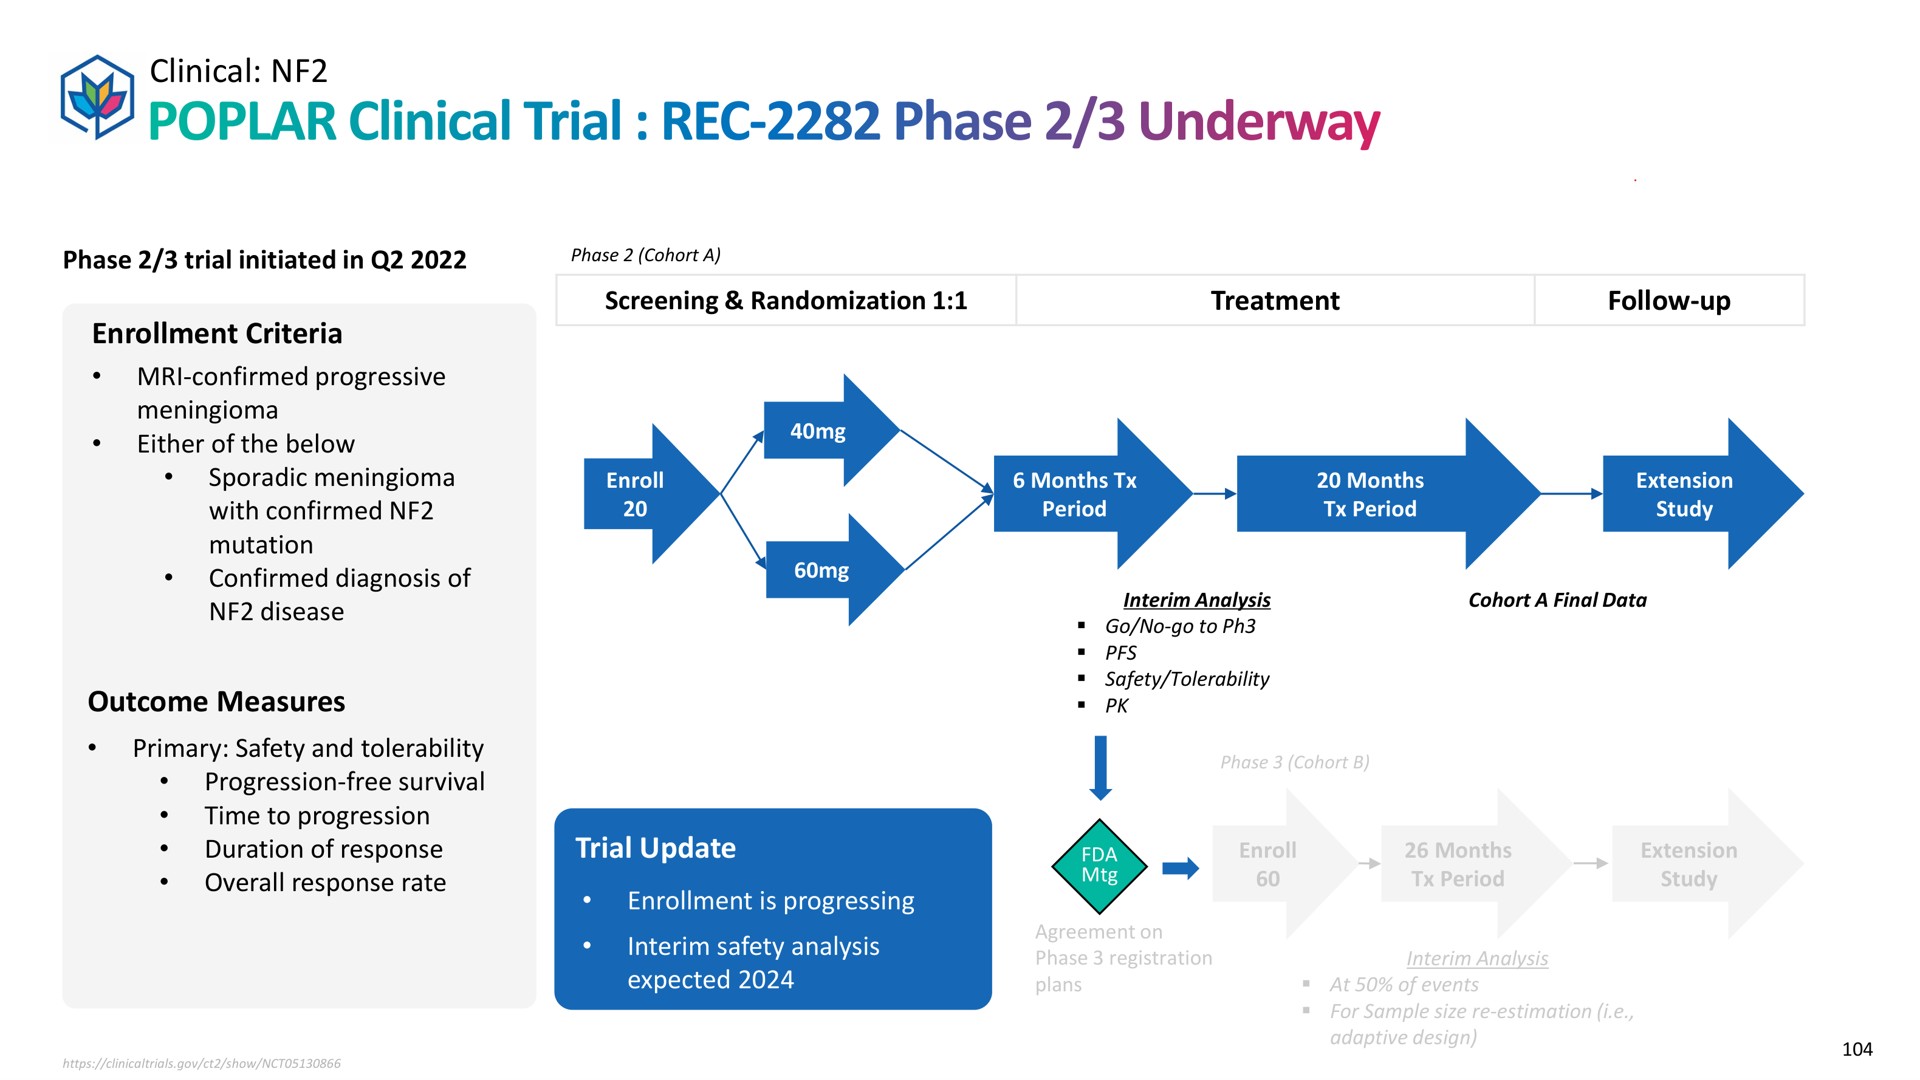 clinical enrollment criteria outcome measures trial update poplar phase underway | Recursion Pharmaceuticals